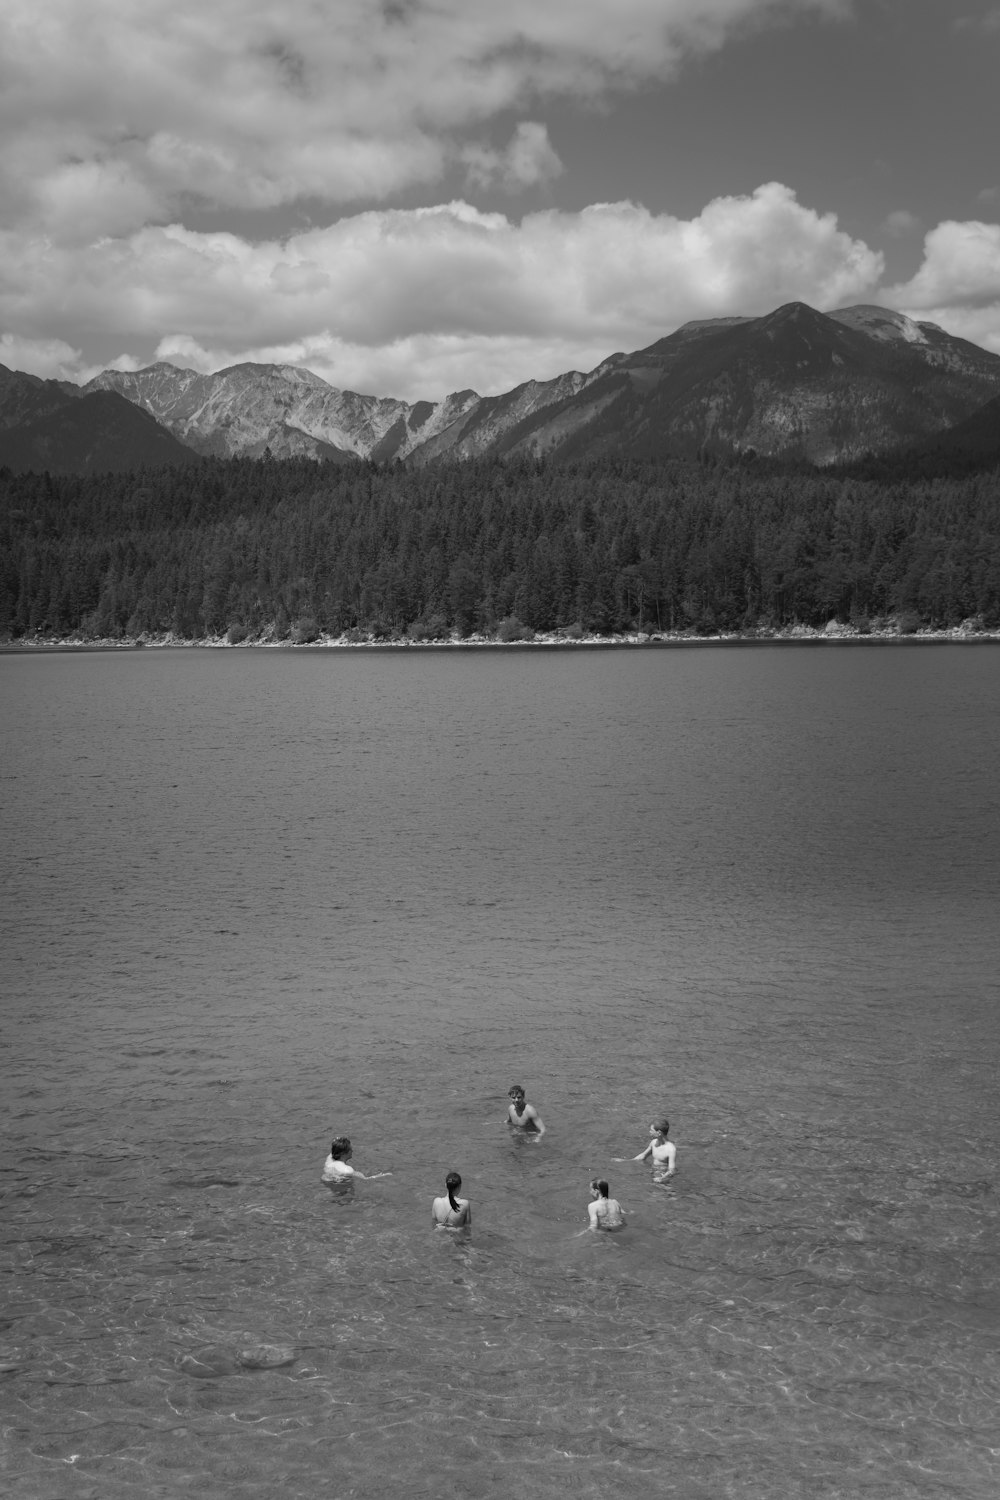 a group of people wading in a lake with mountains in the background